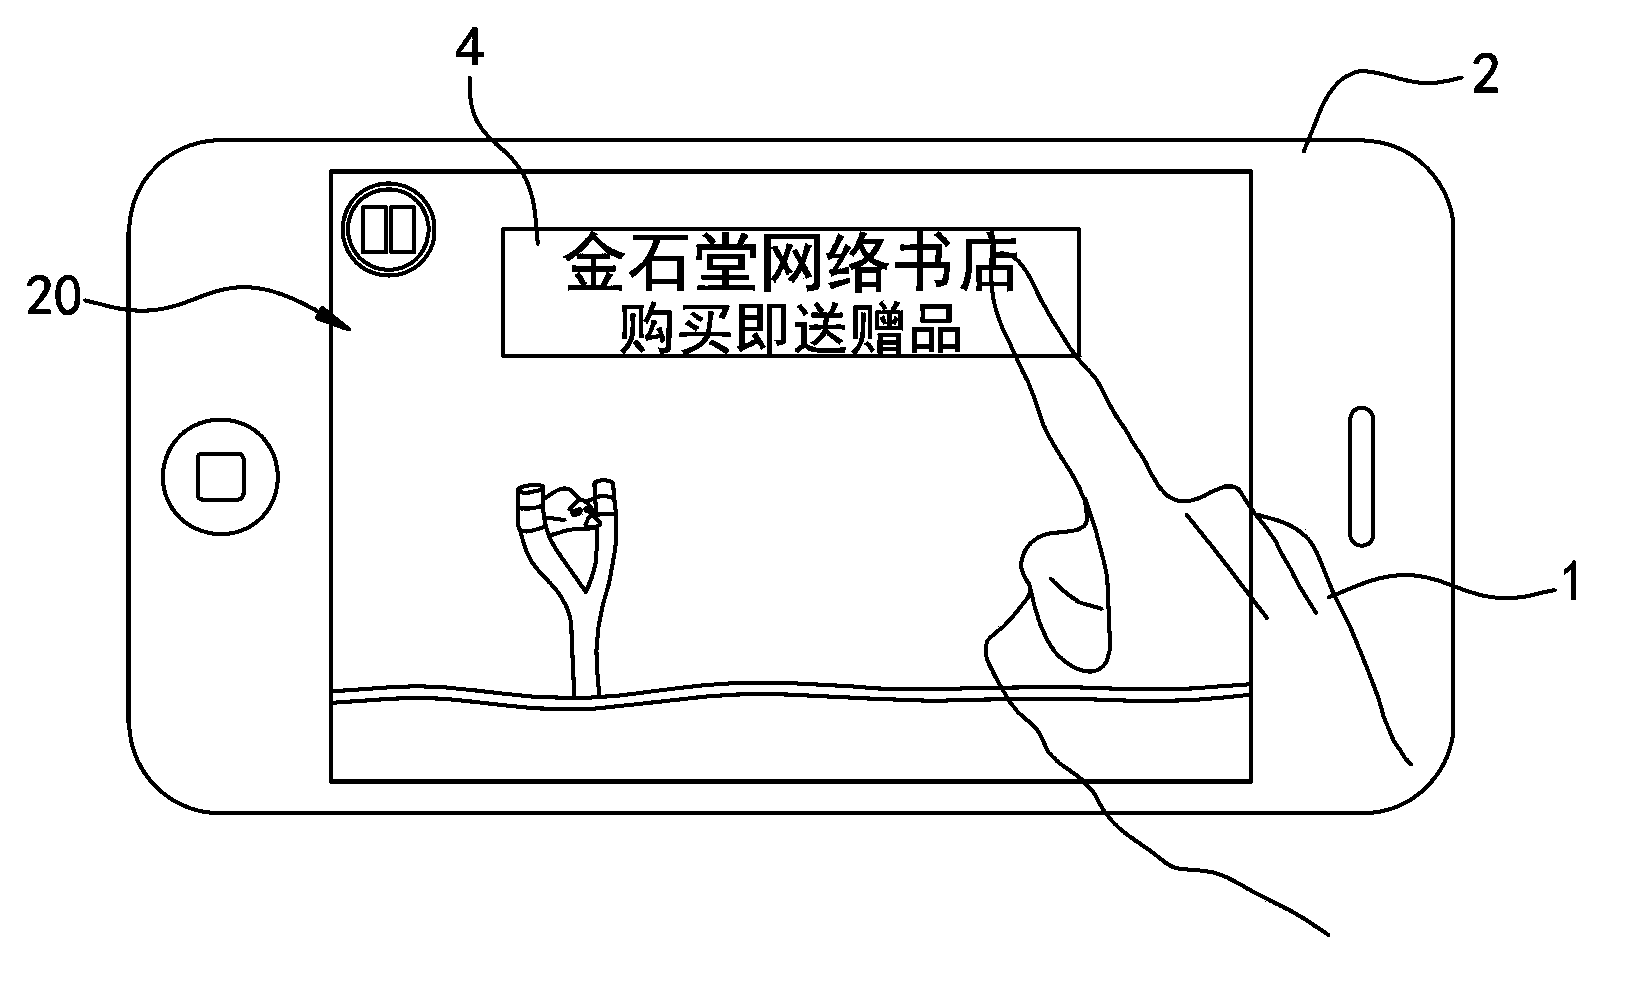 Online shopping system for stimulating consumption through advertising and method thereof